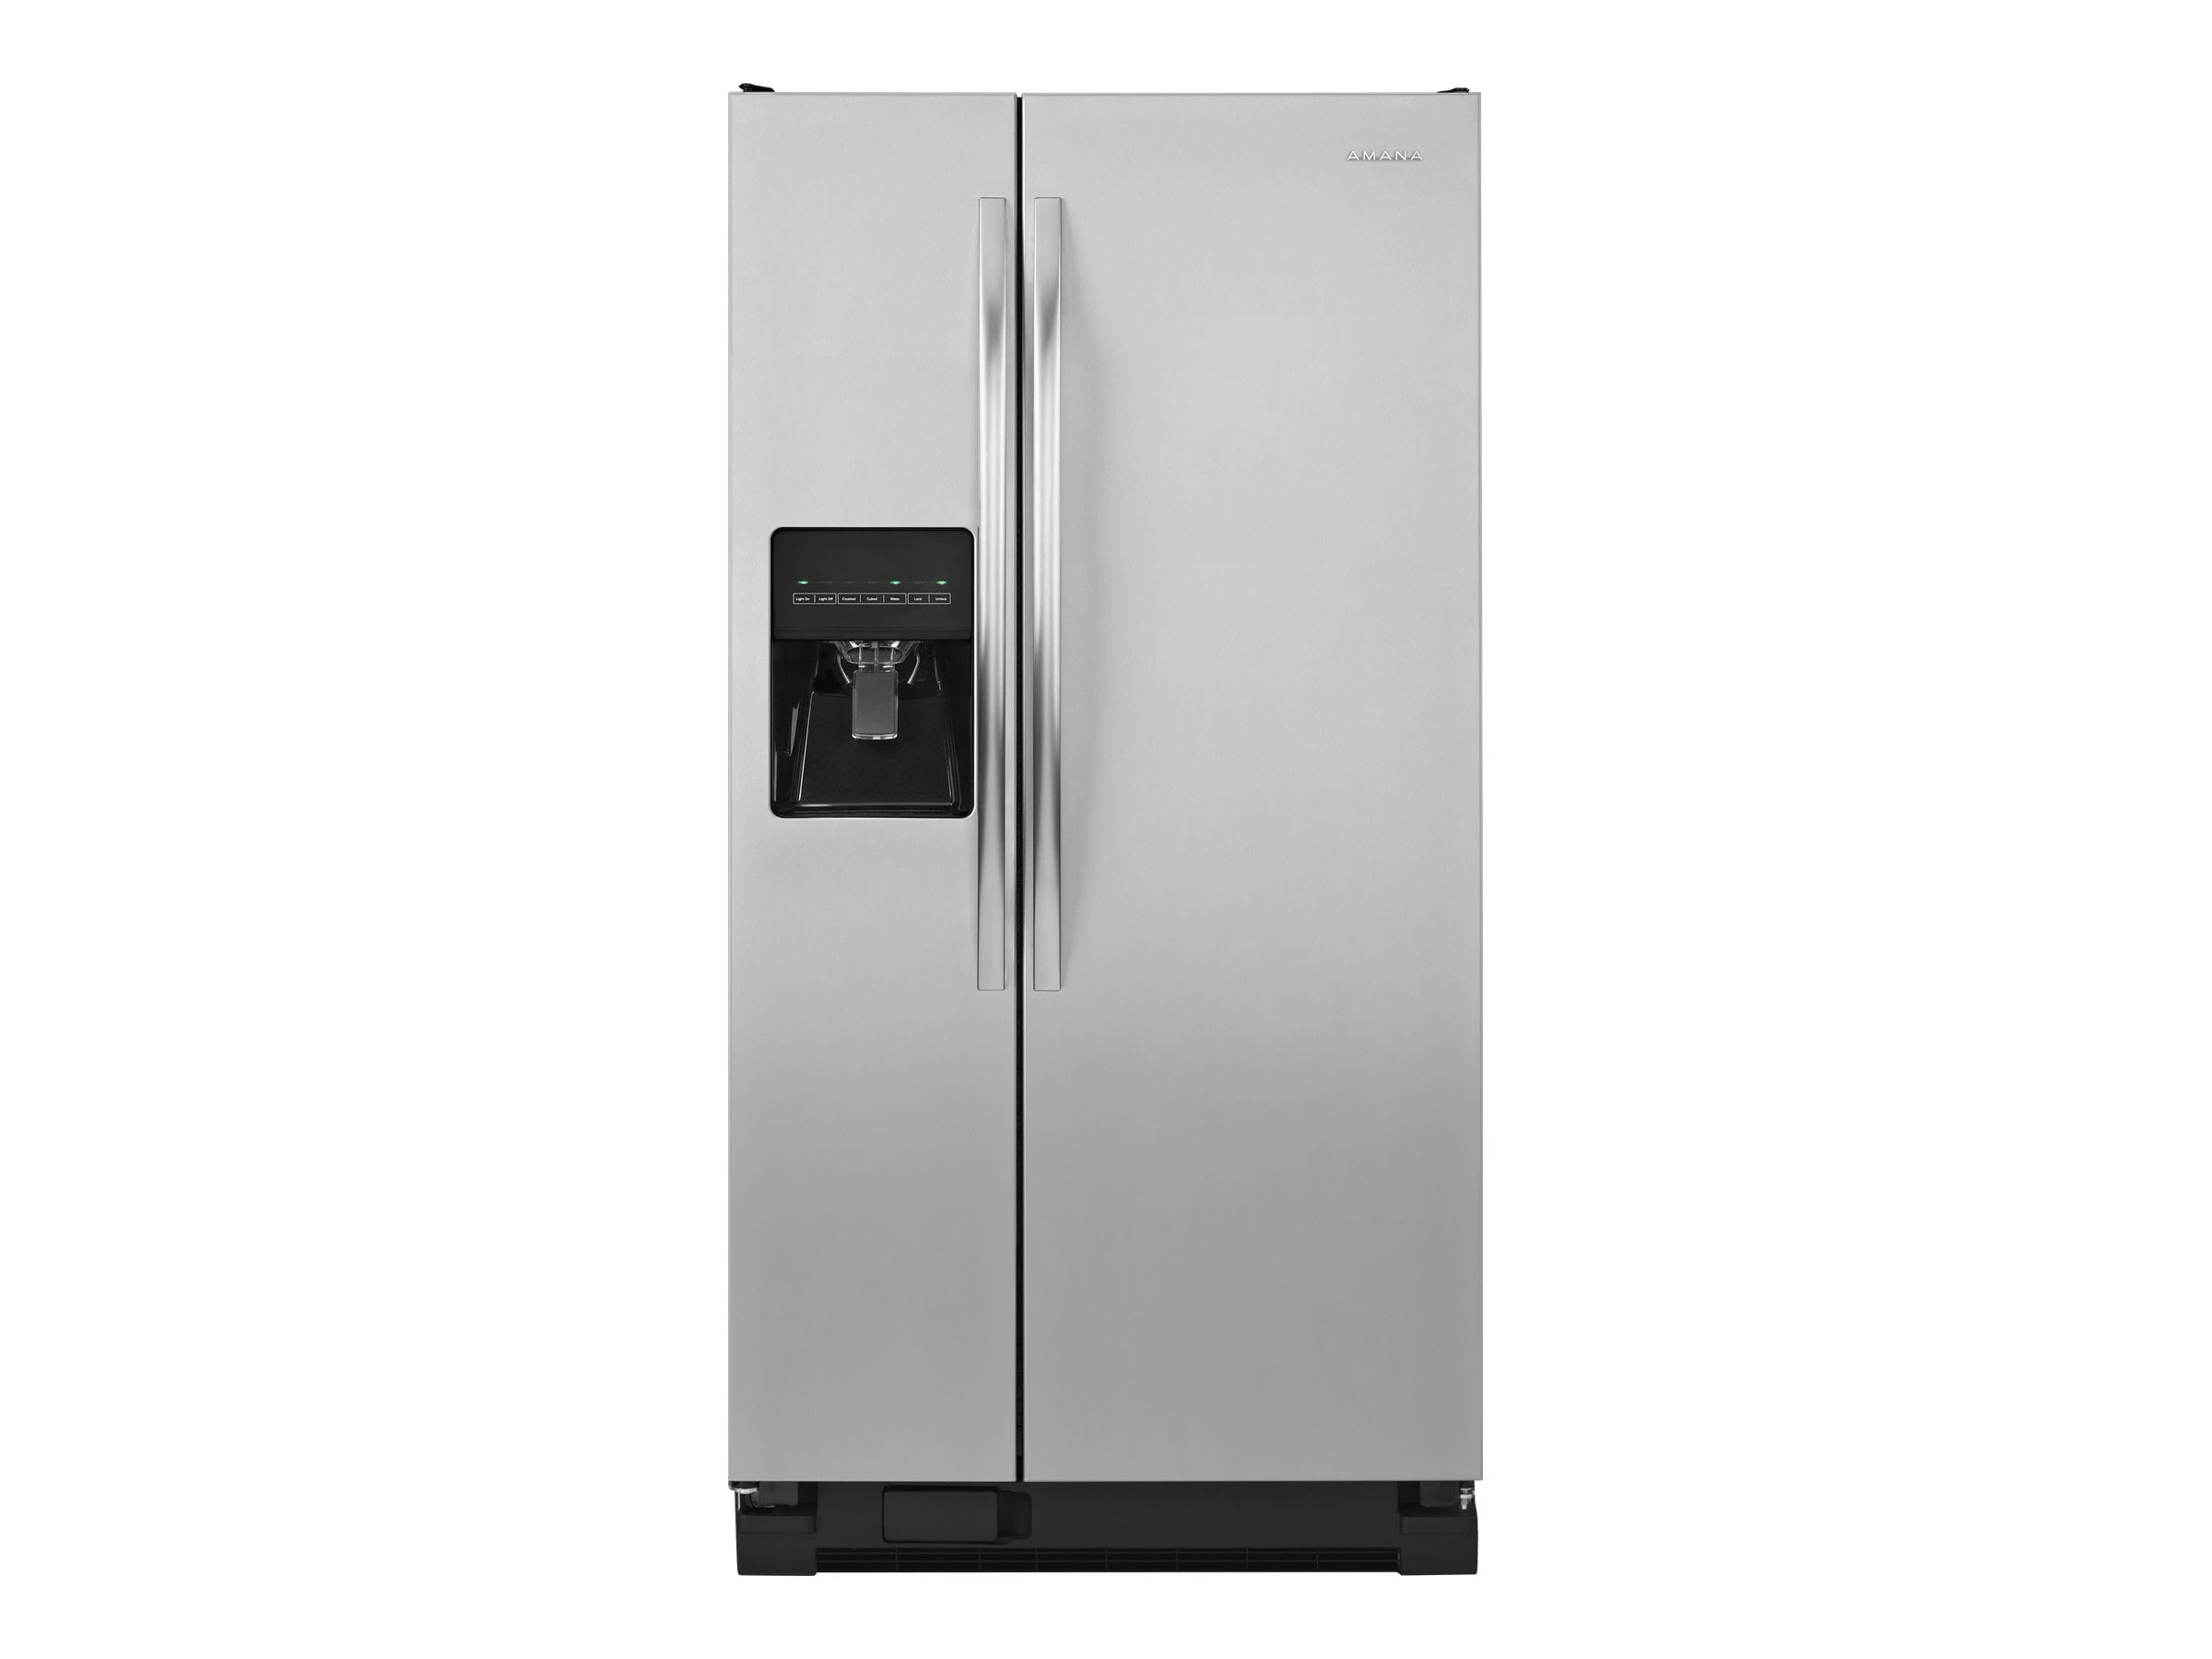 Amana ASD2275BRS - Refrigerator/freezer - side-by-side with ice & water 66 Inch Tall Stainless Steel Refrigerator